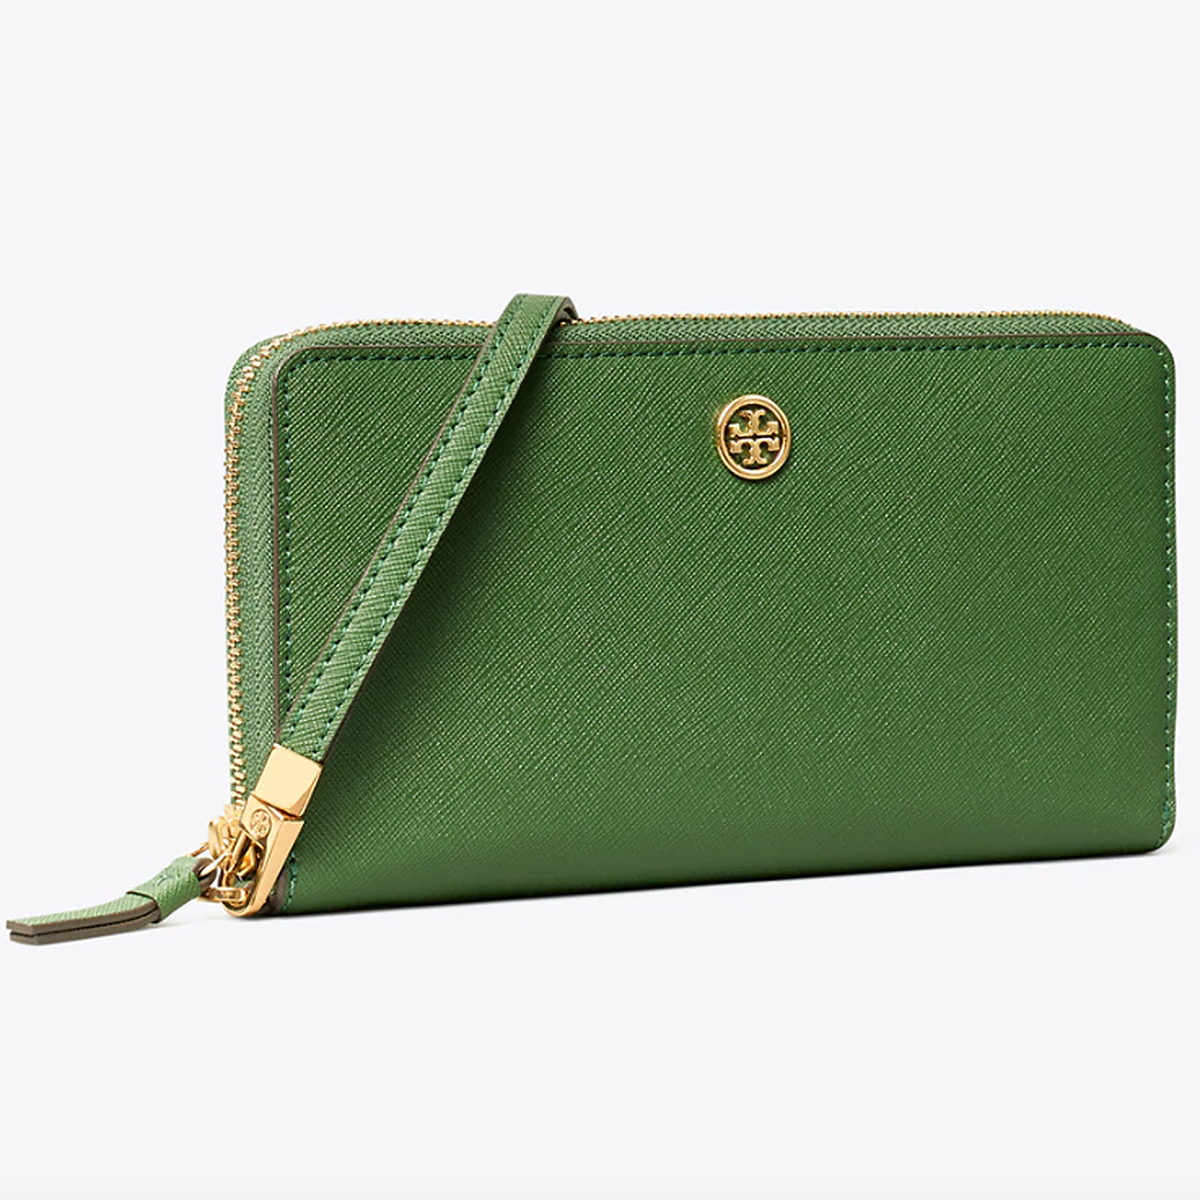 Tory Burch Bags: 15 Picks From the Semi-Annual Sale Up to 62% Off ...